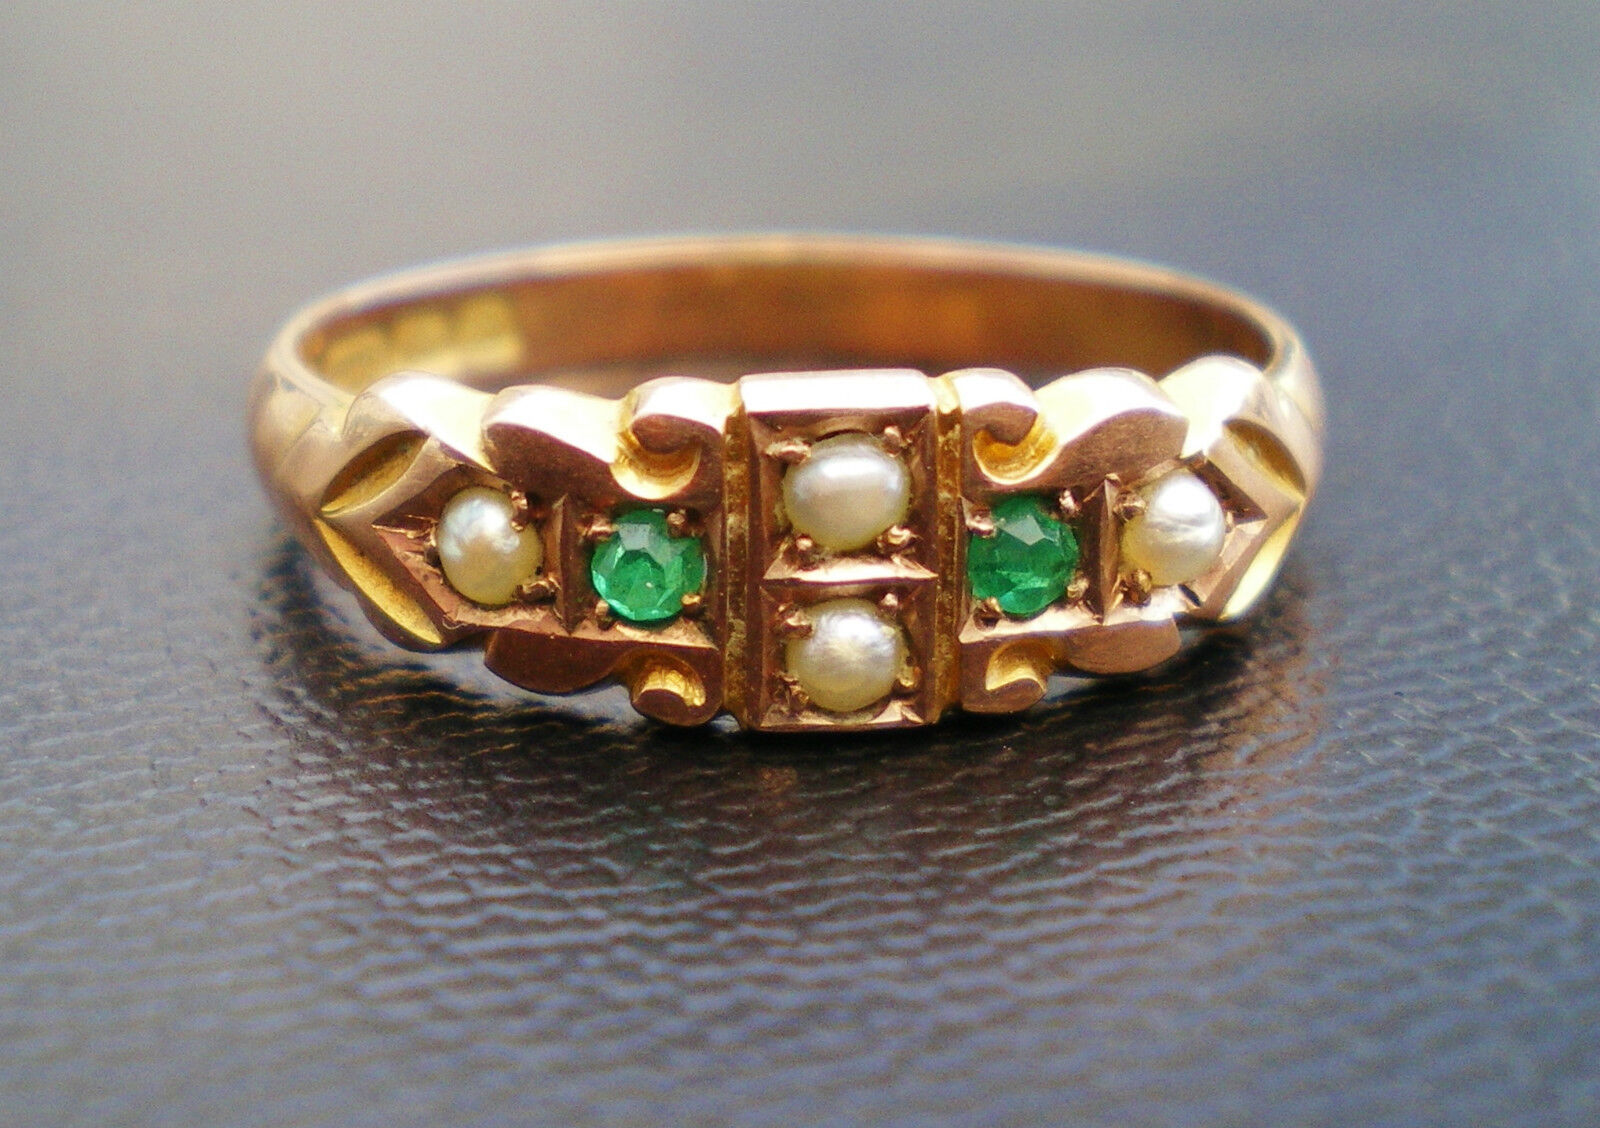 Stunning Antique Victorian 9ct Rose Gold Emerald & Pearl Ring c1900; UK Size \'Q\'